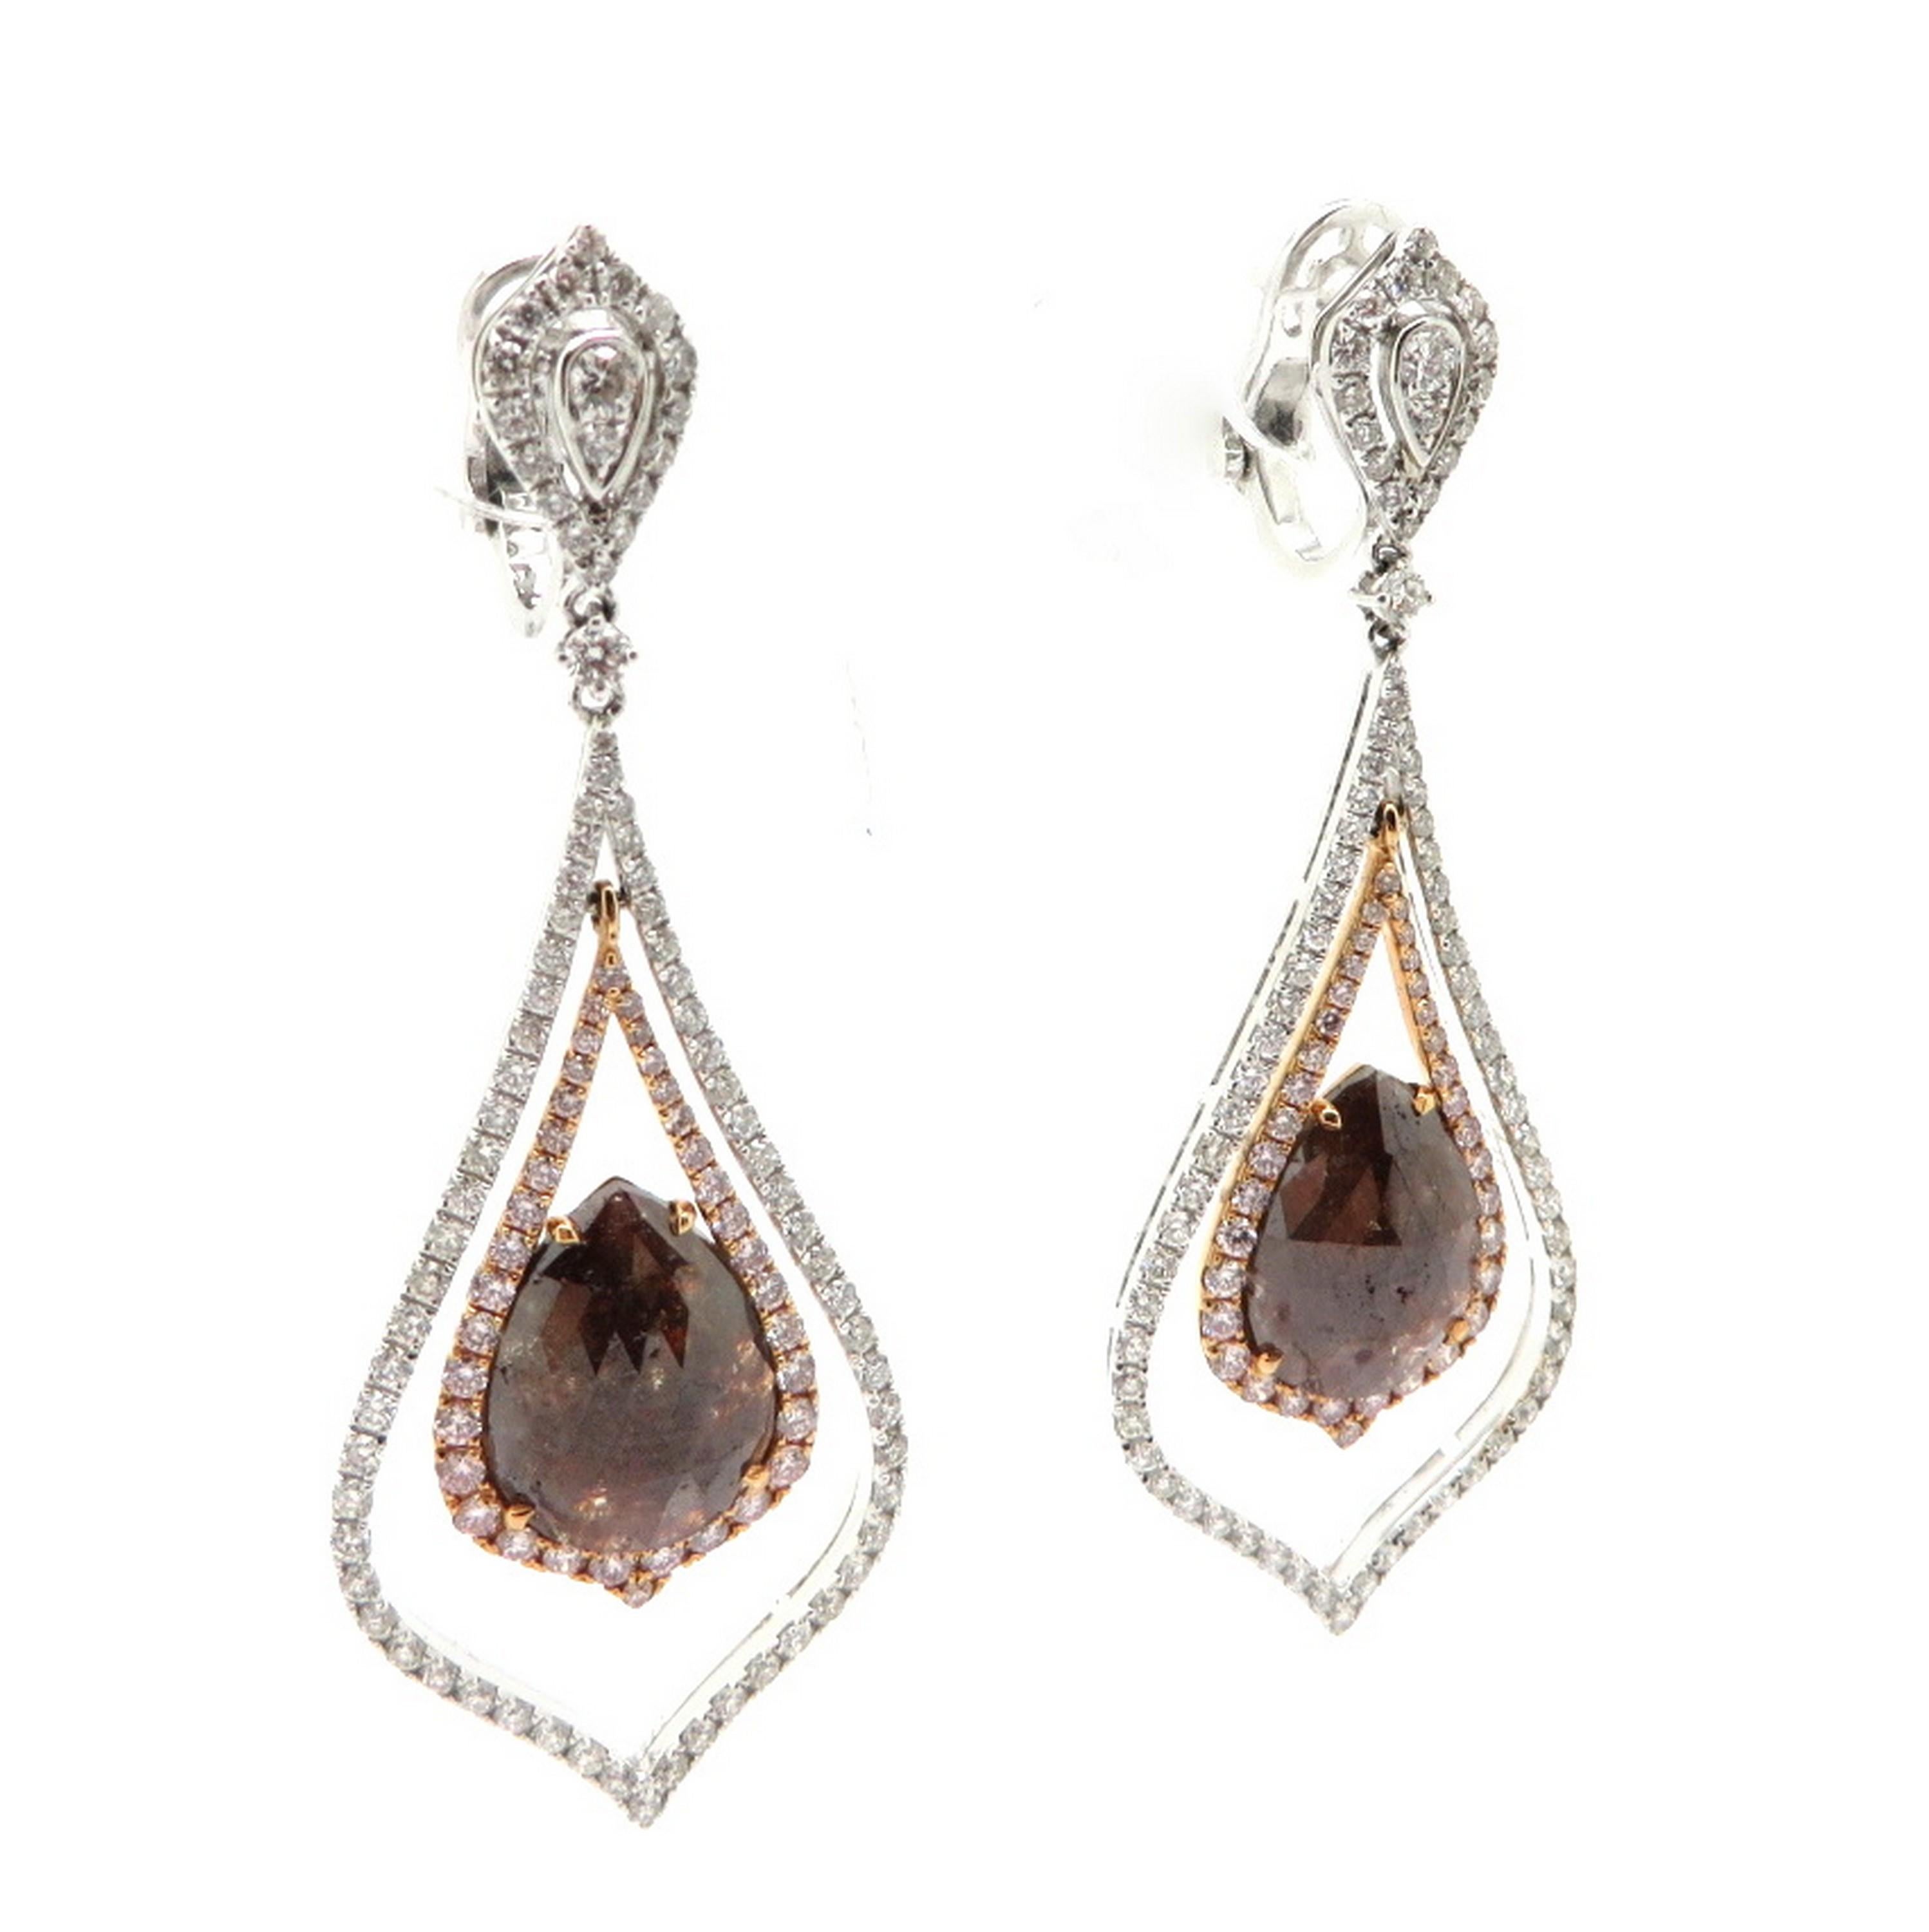 Estate round white and pink diamond dangle drop earrings set in 18K two-tone gold. Showcasing two pear shaped brown diamonds, weighing 9.17 carats. Accented with 72 fancy pink round brilliant cut diamonds, weighing 0.90 carats total and 156 round